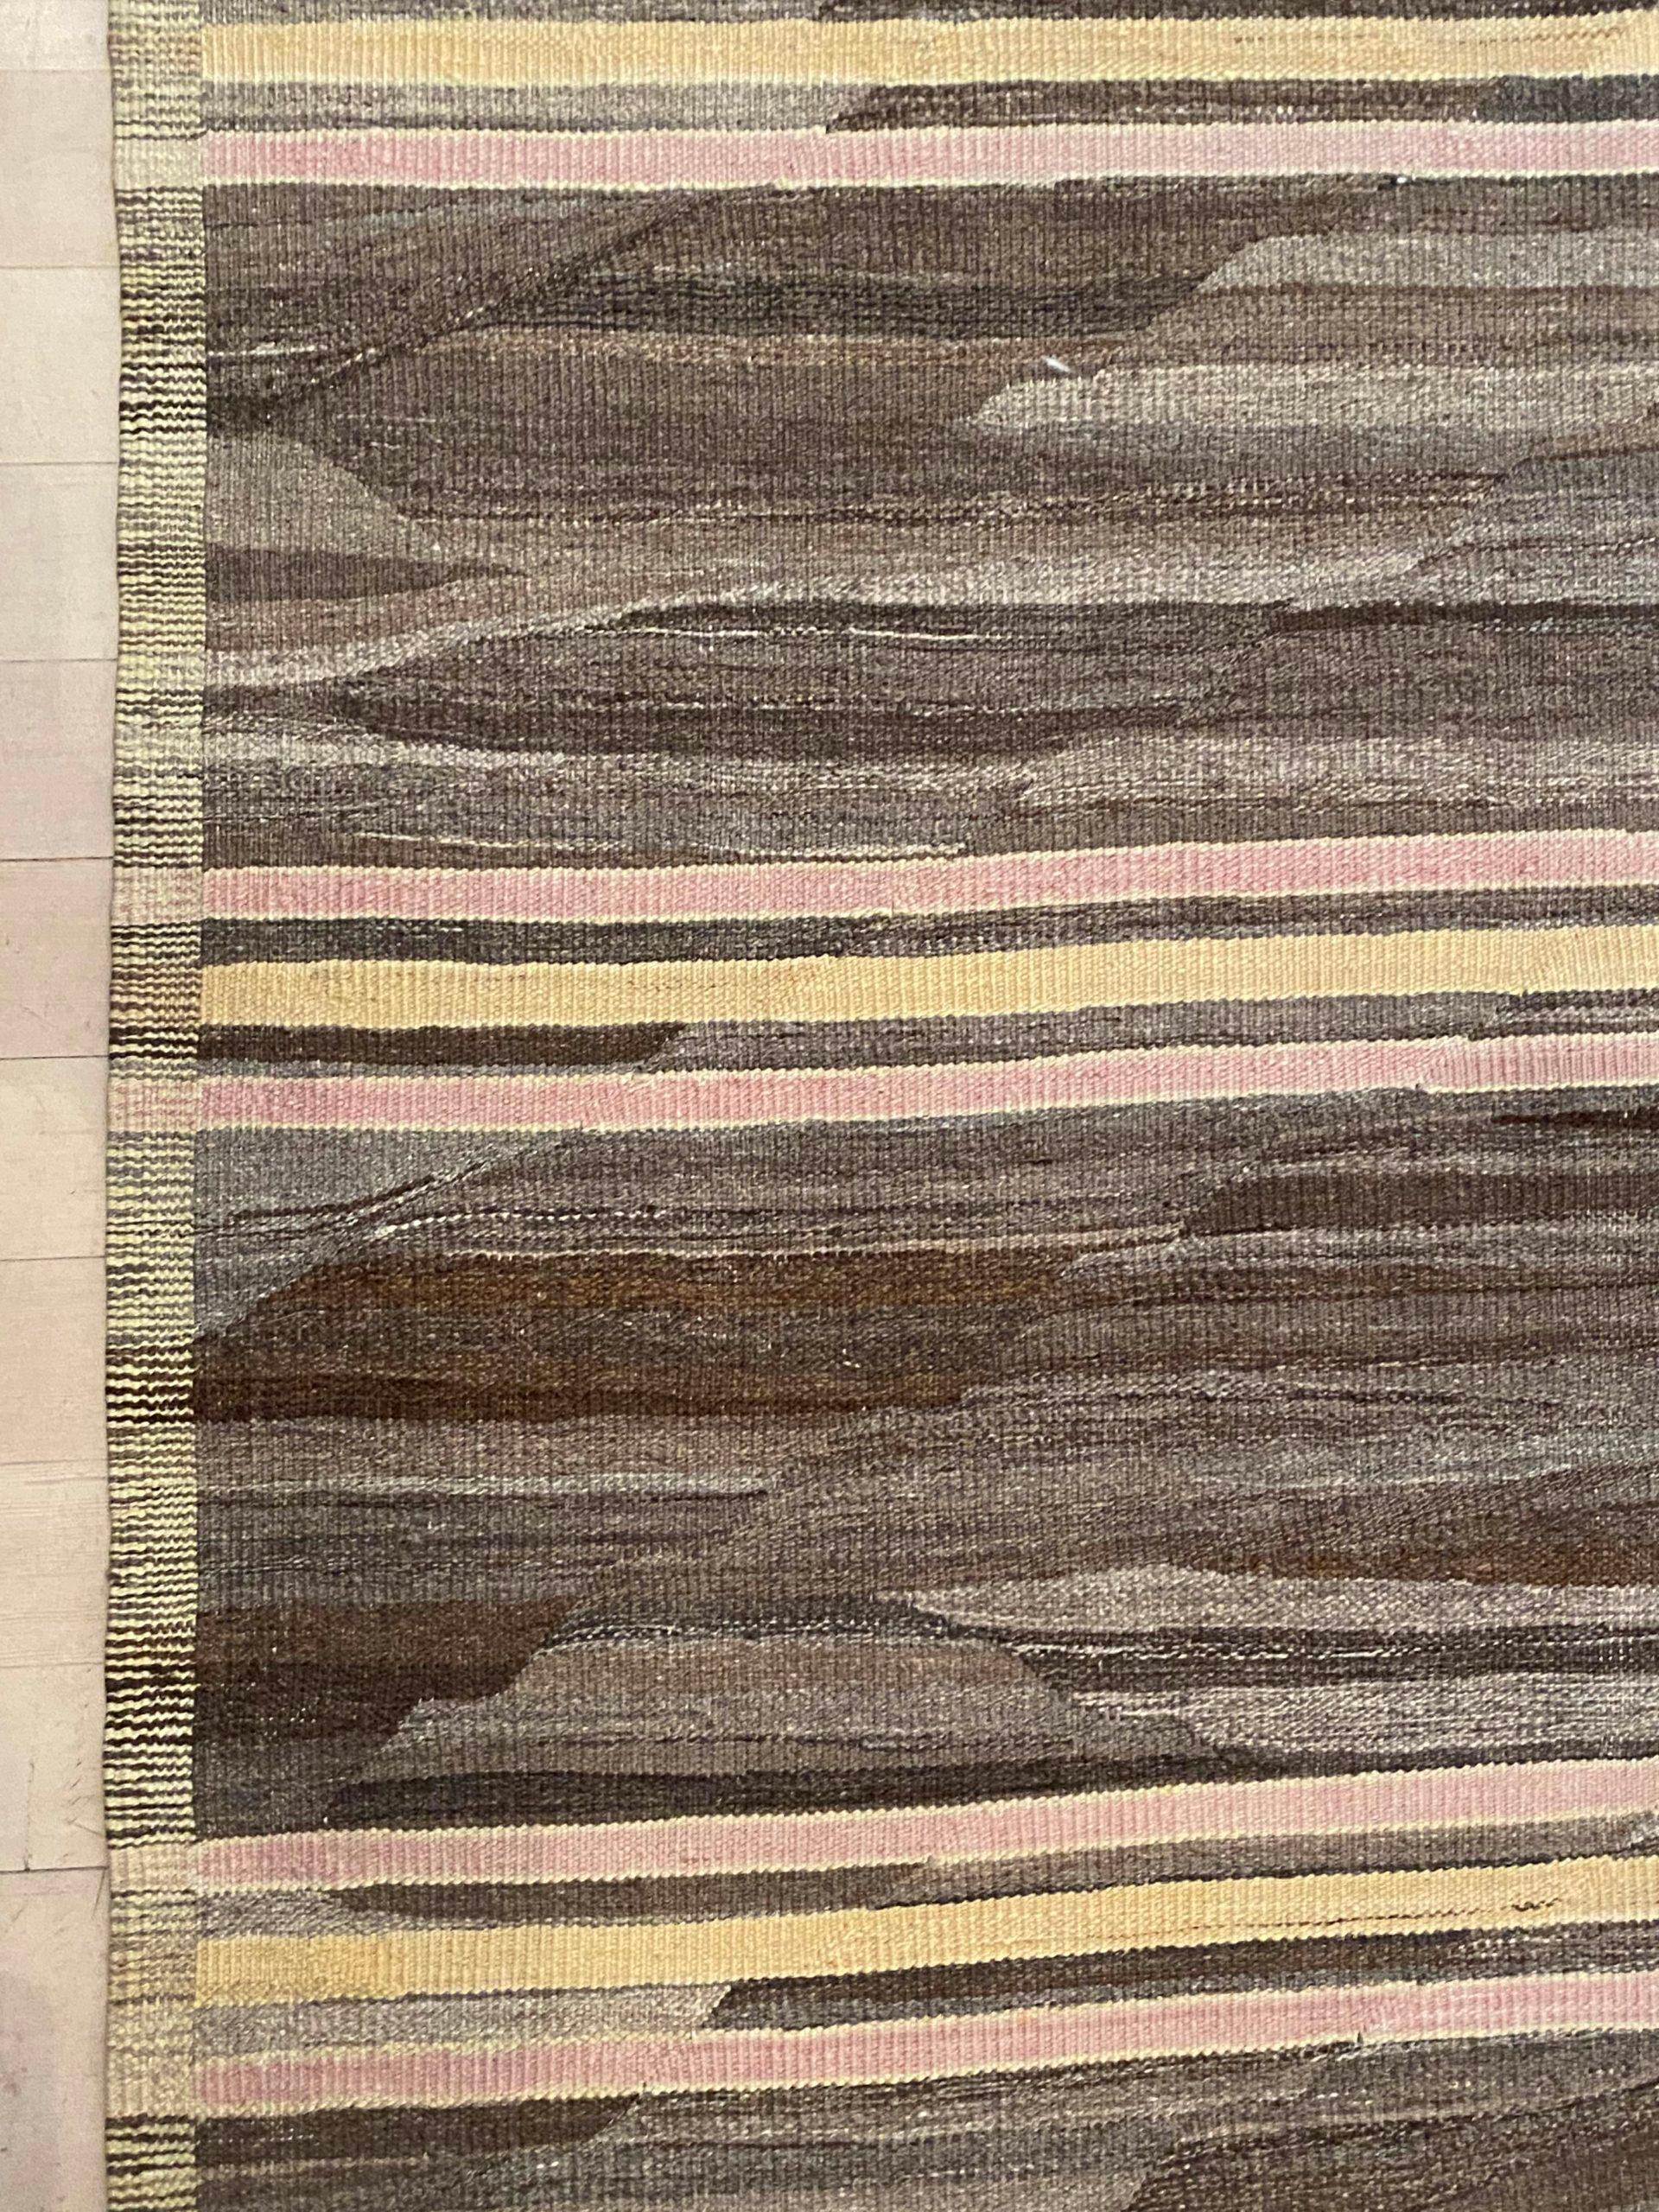 Origin: Afghanistan
Dimensions: 19’6? x 12’6?
Age: 2000’s
Design: Stripe Kilim
Material: 100% wool flatweave
Color: Chocolate, Beige

k4500

The word “kilim” is of Turkish origin. It is used to refer to a high-quality pileless rug made from